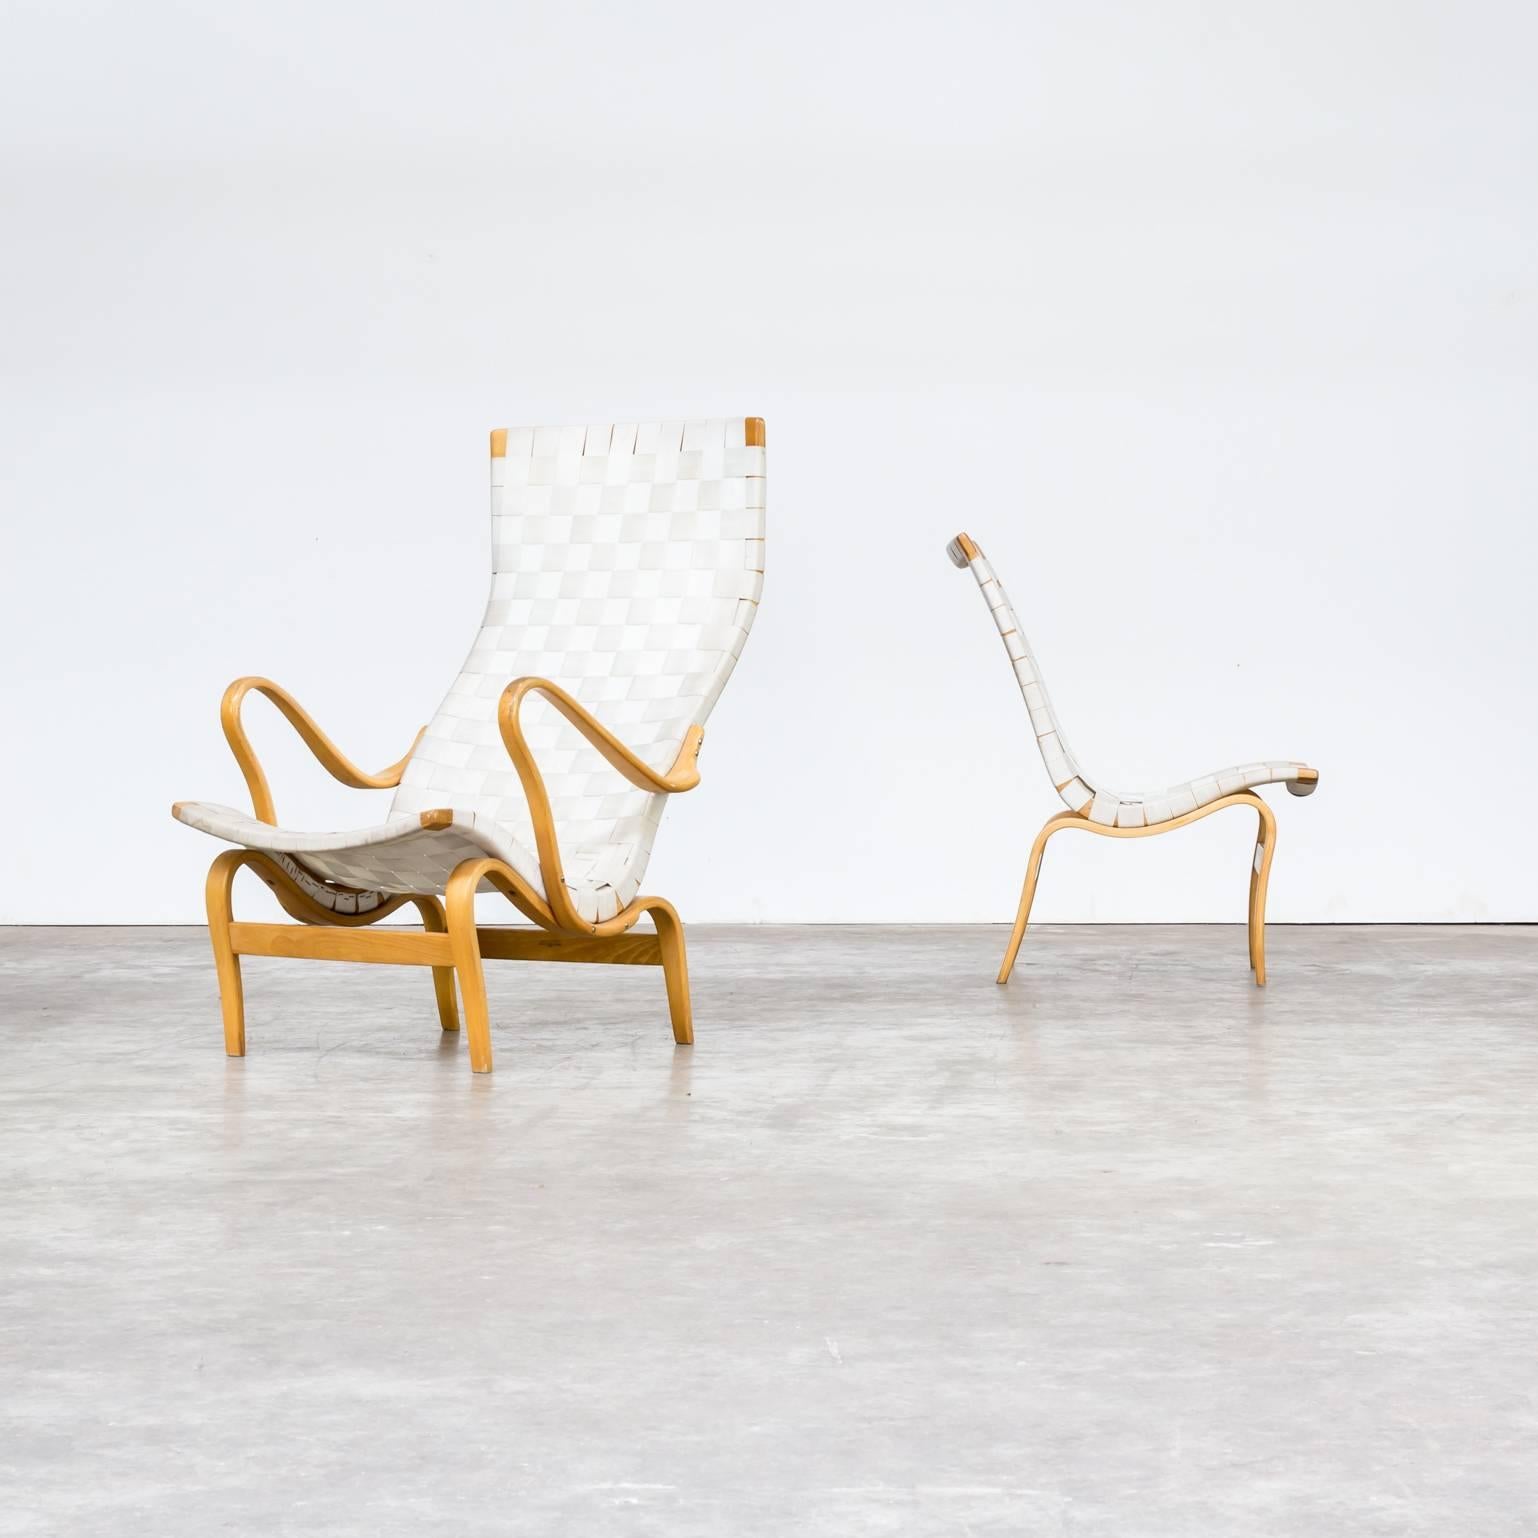 1970s Bruno Mathsson ‘pernilla’ chairs for DUX. Good condition wear consistent with age and use.